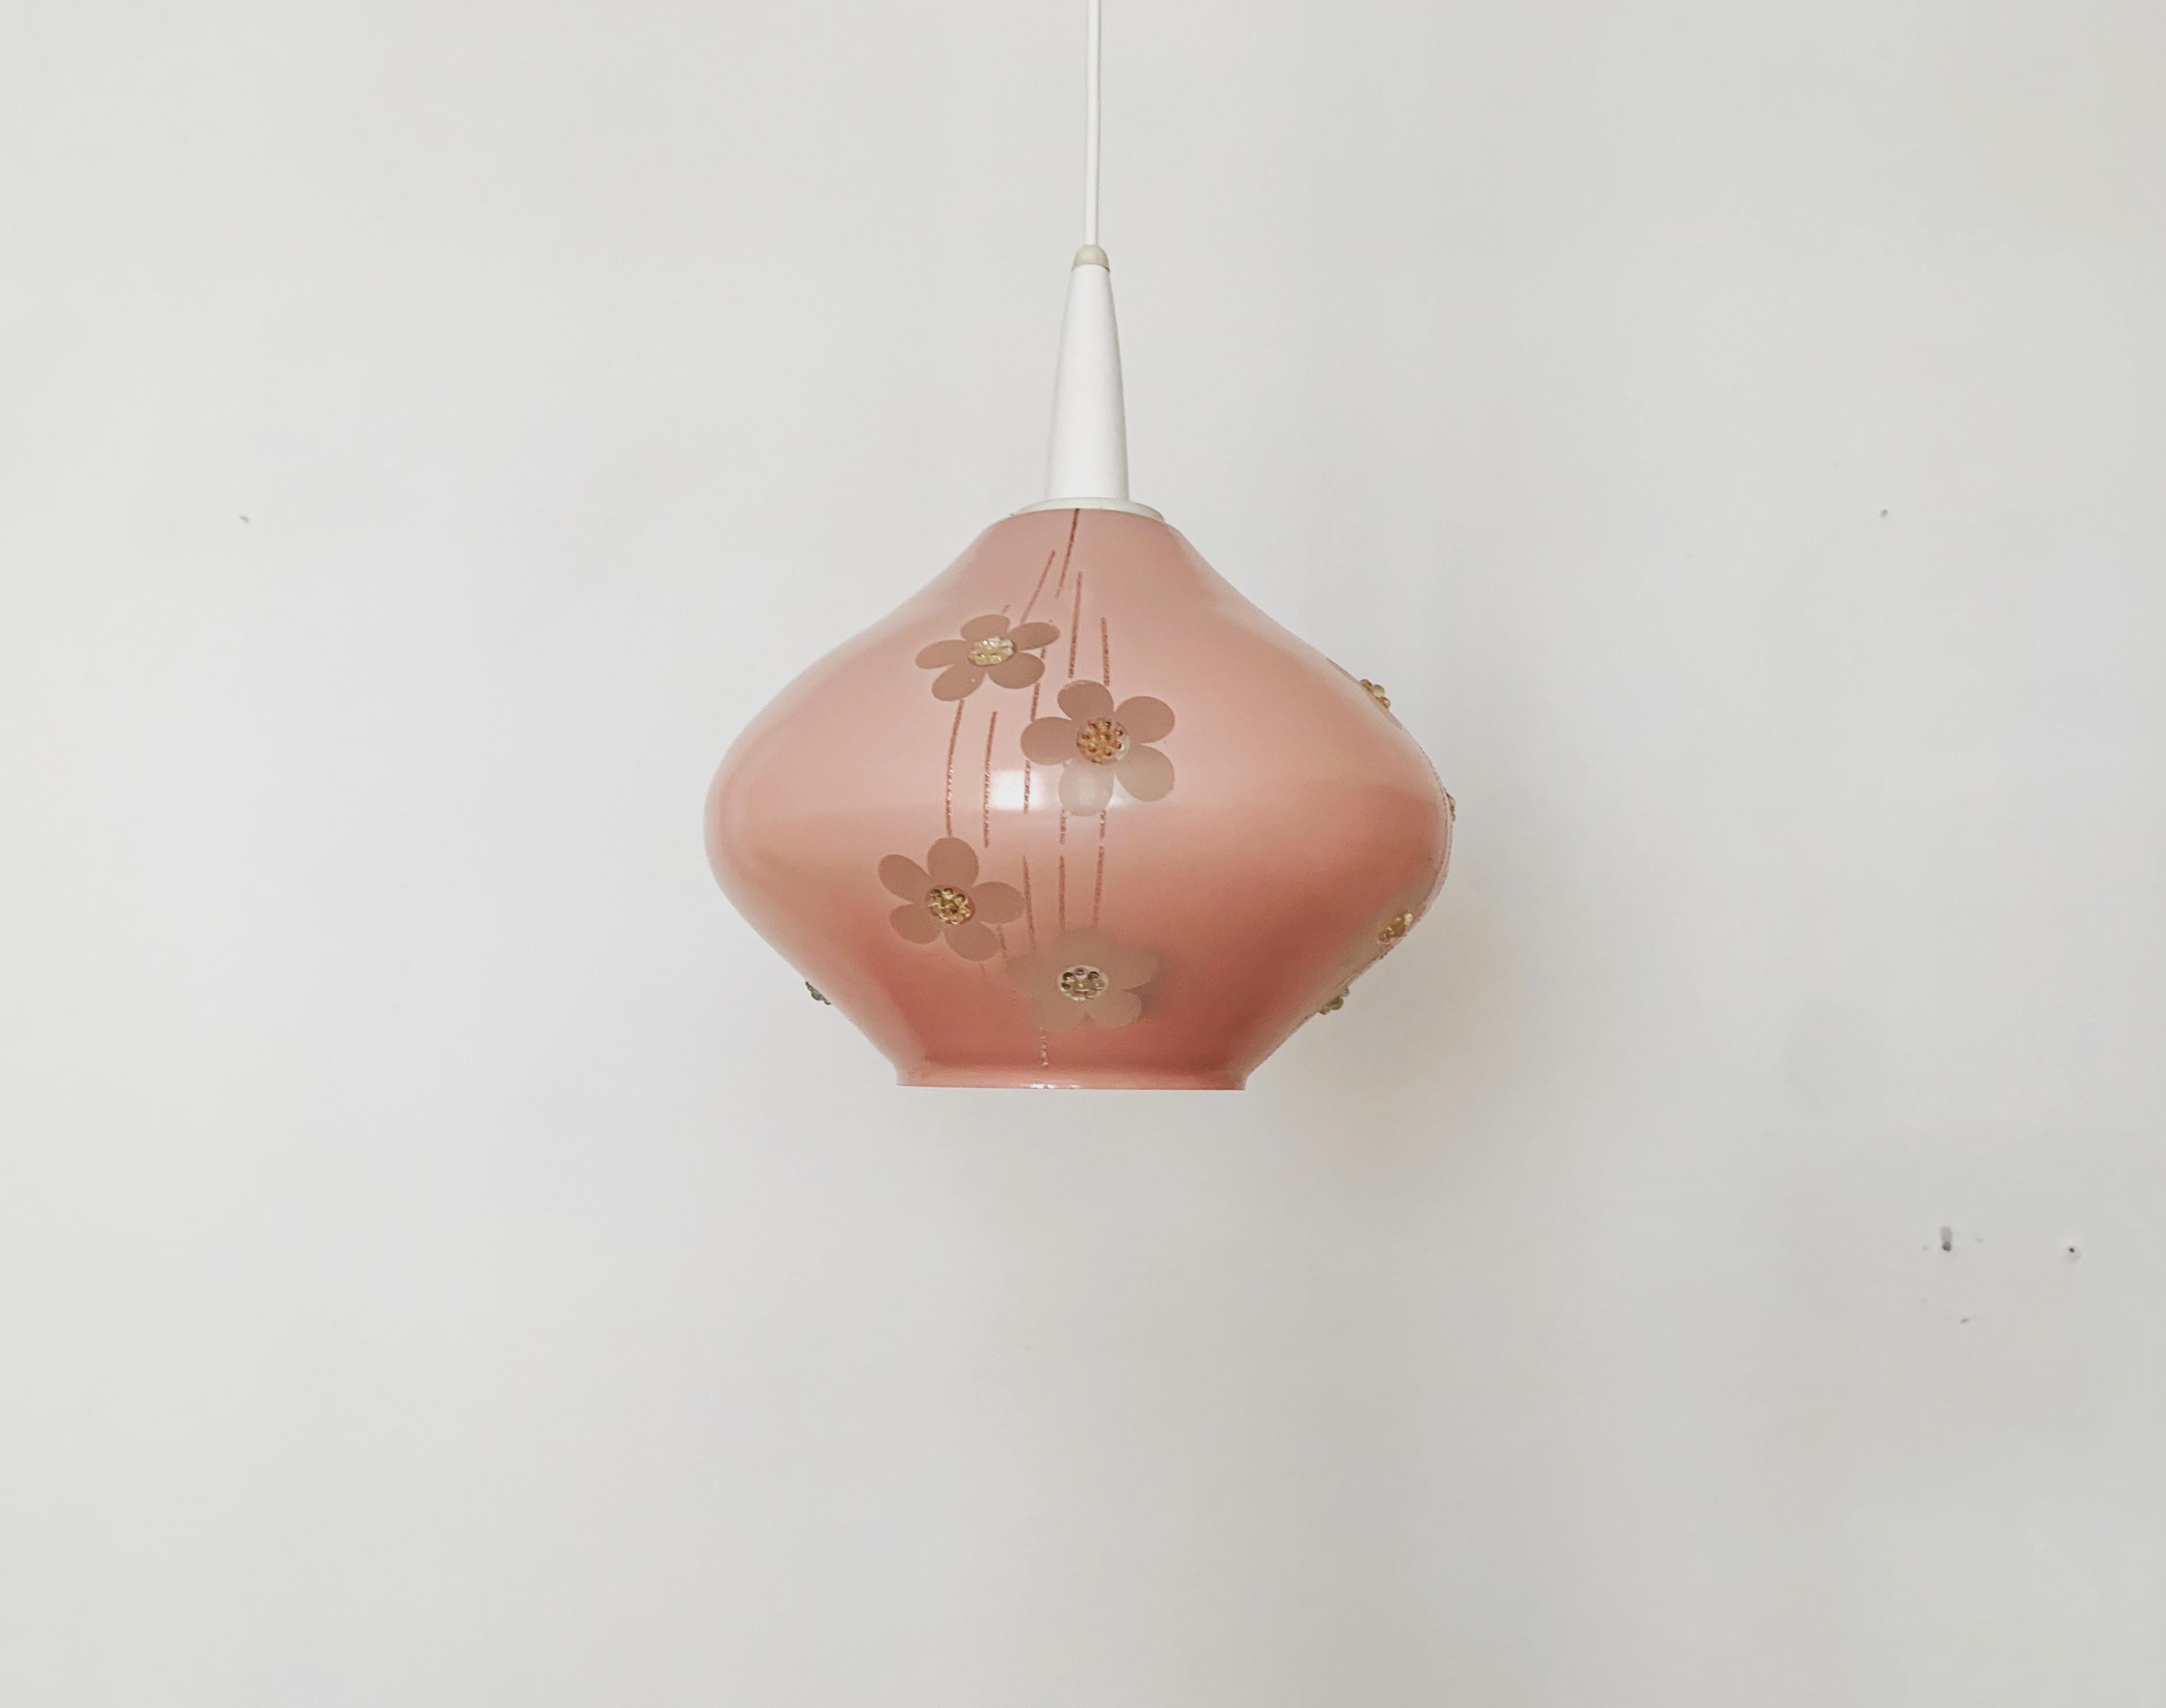 Wonderful pink glass pendant lamp from the 1950s.
The lamp is lovingly processed with special details such as the raised flowers.
A very warm light is created.

Condition:

In good vintage condition with slight signs of wear consistent with